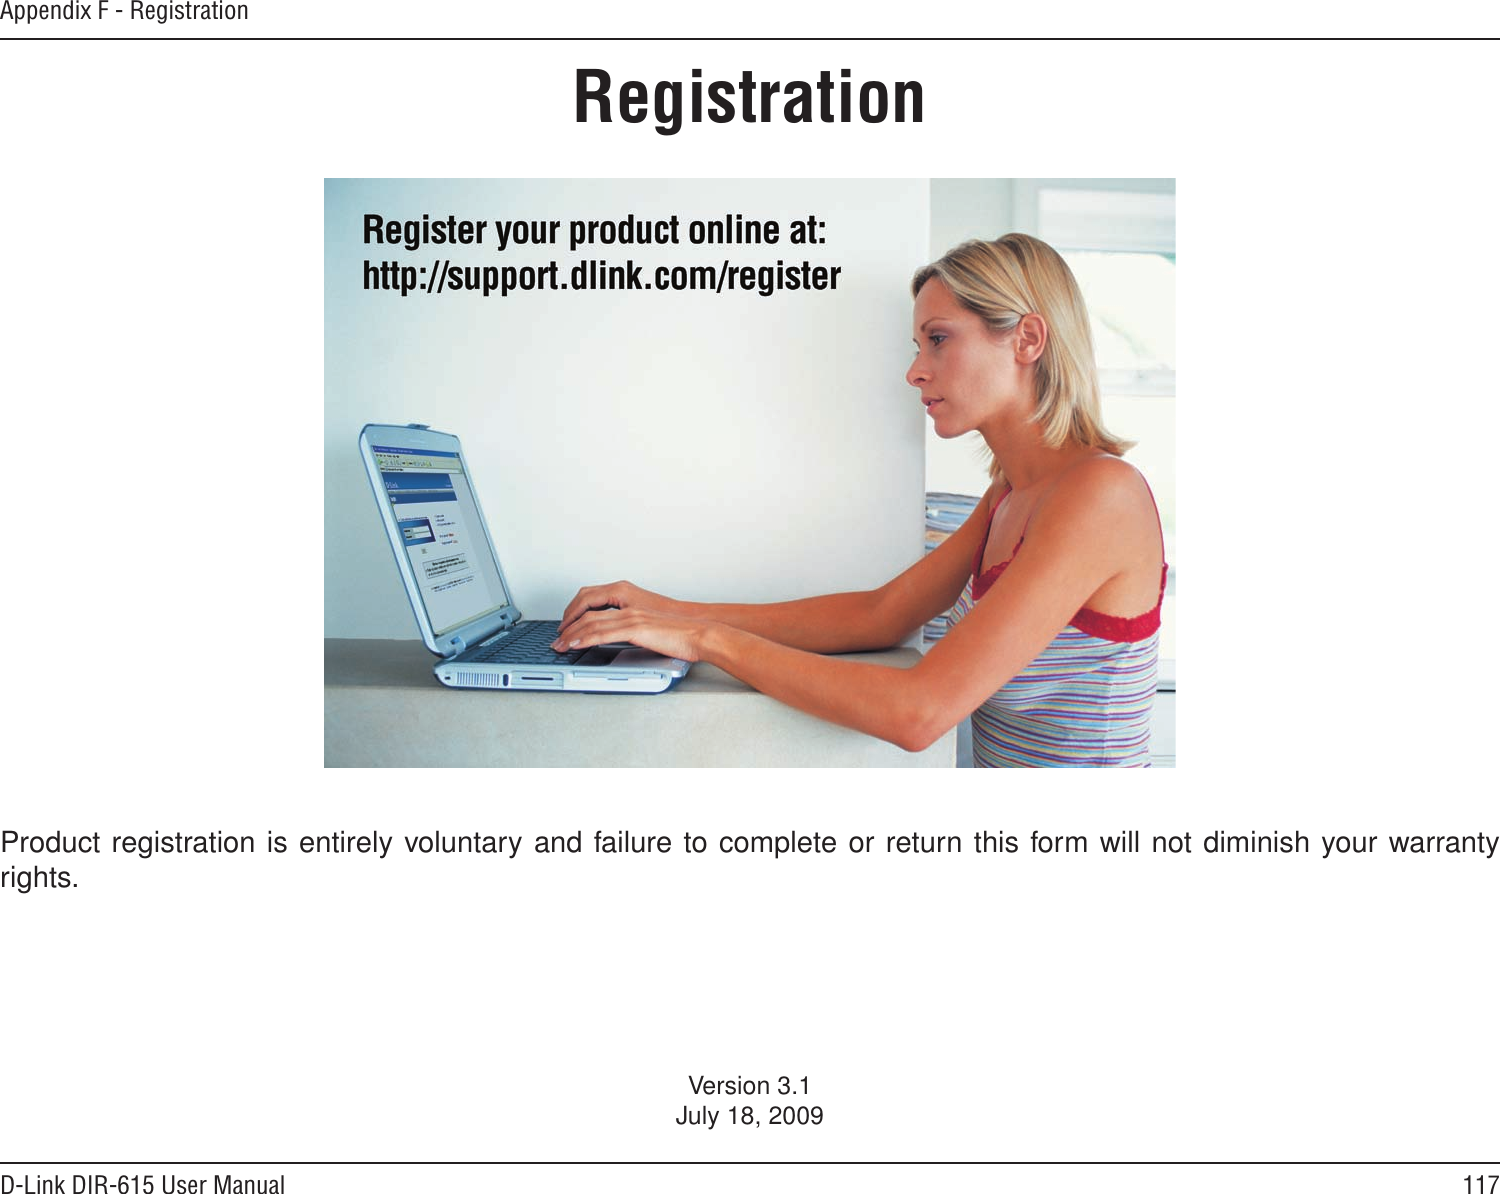 117D-Link DIR-615 User ManualAppendix F - RegistrationVersion 3.1July 18, 2009Product registration is entirely voluntary and failure to complete or return this form will not diminish your warranty rights.Registration